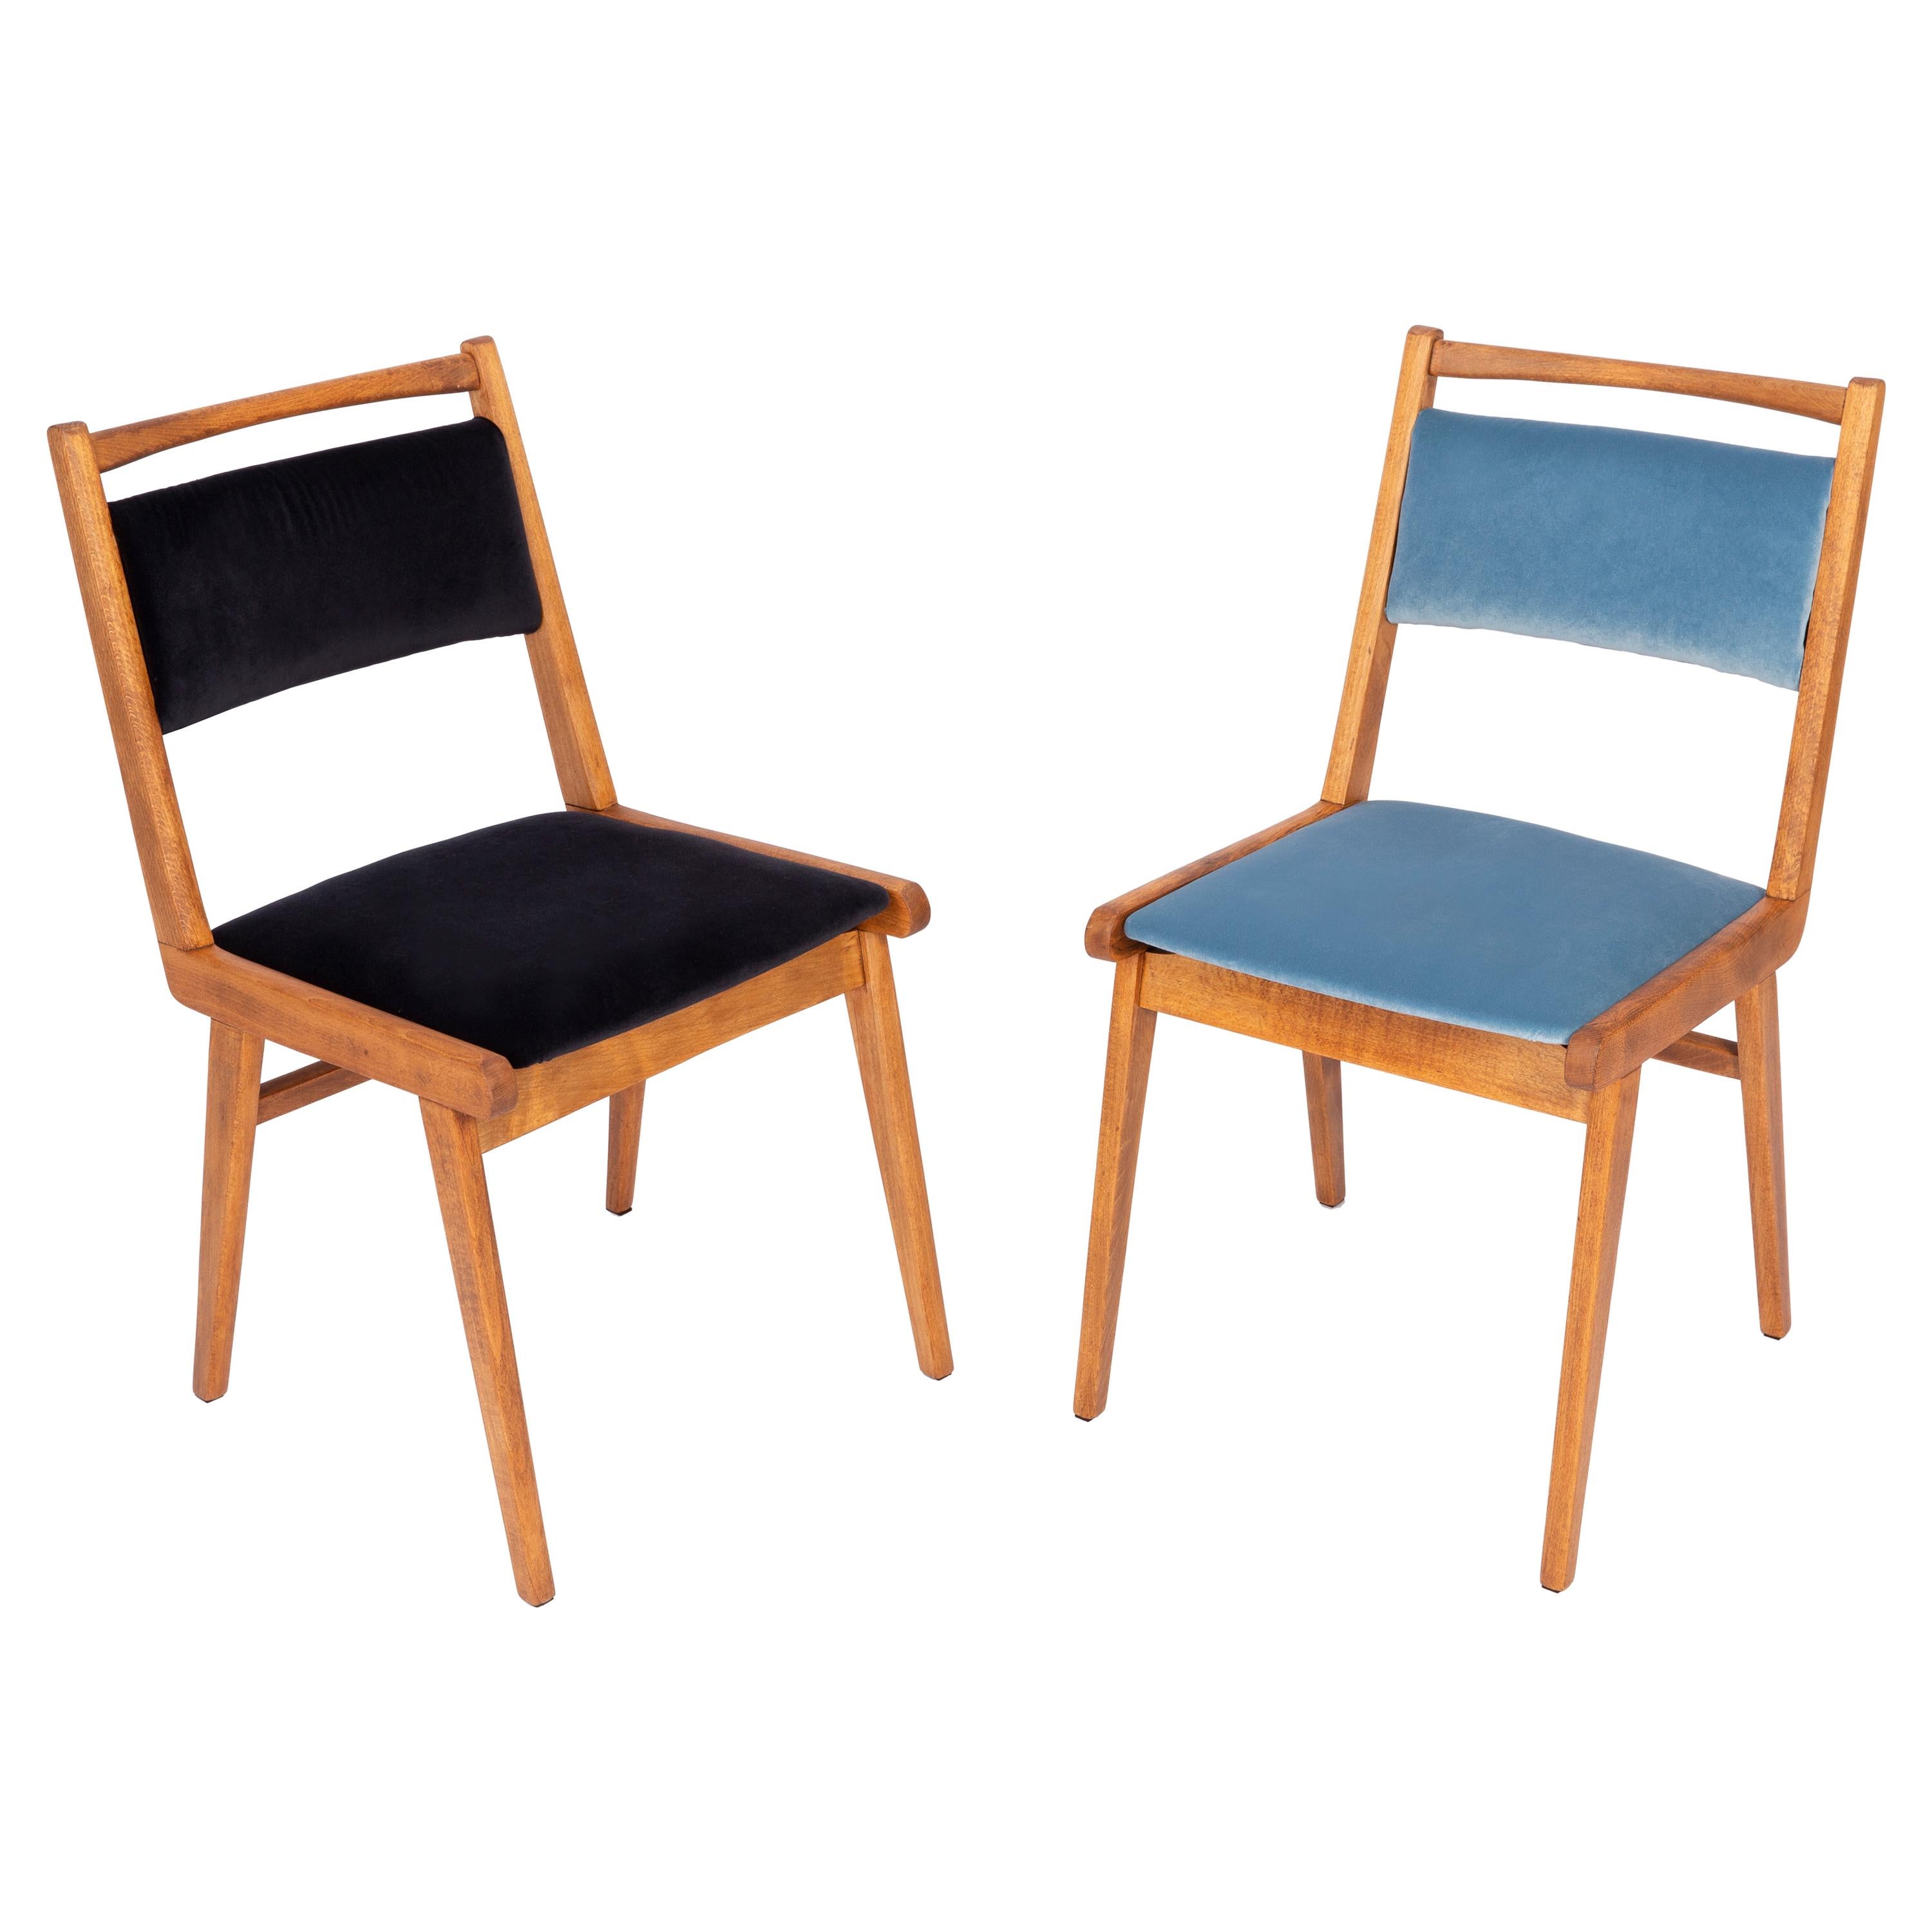 Set of Two 20th Century Black and Blue Velvet Chairs, Poland, 1960s